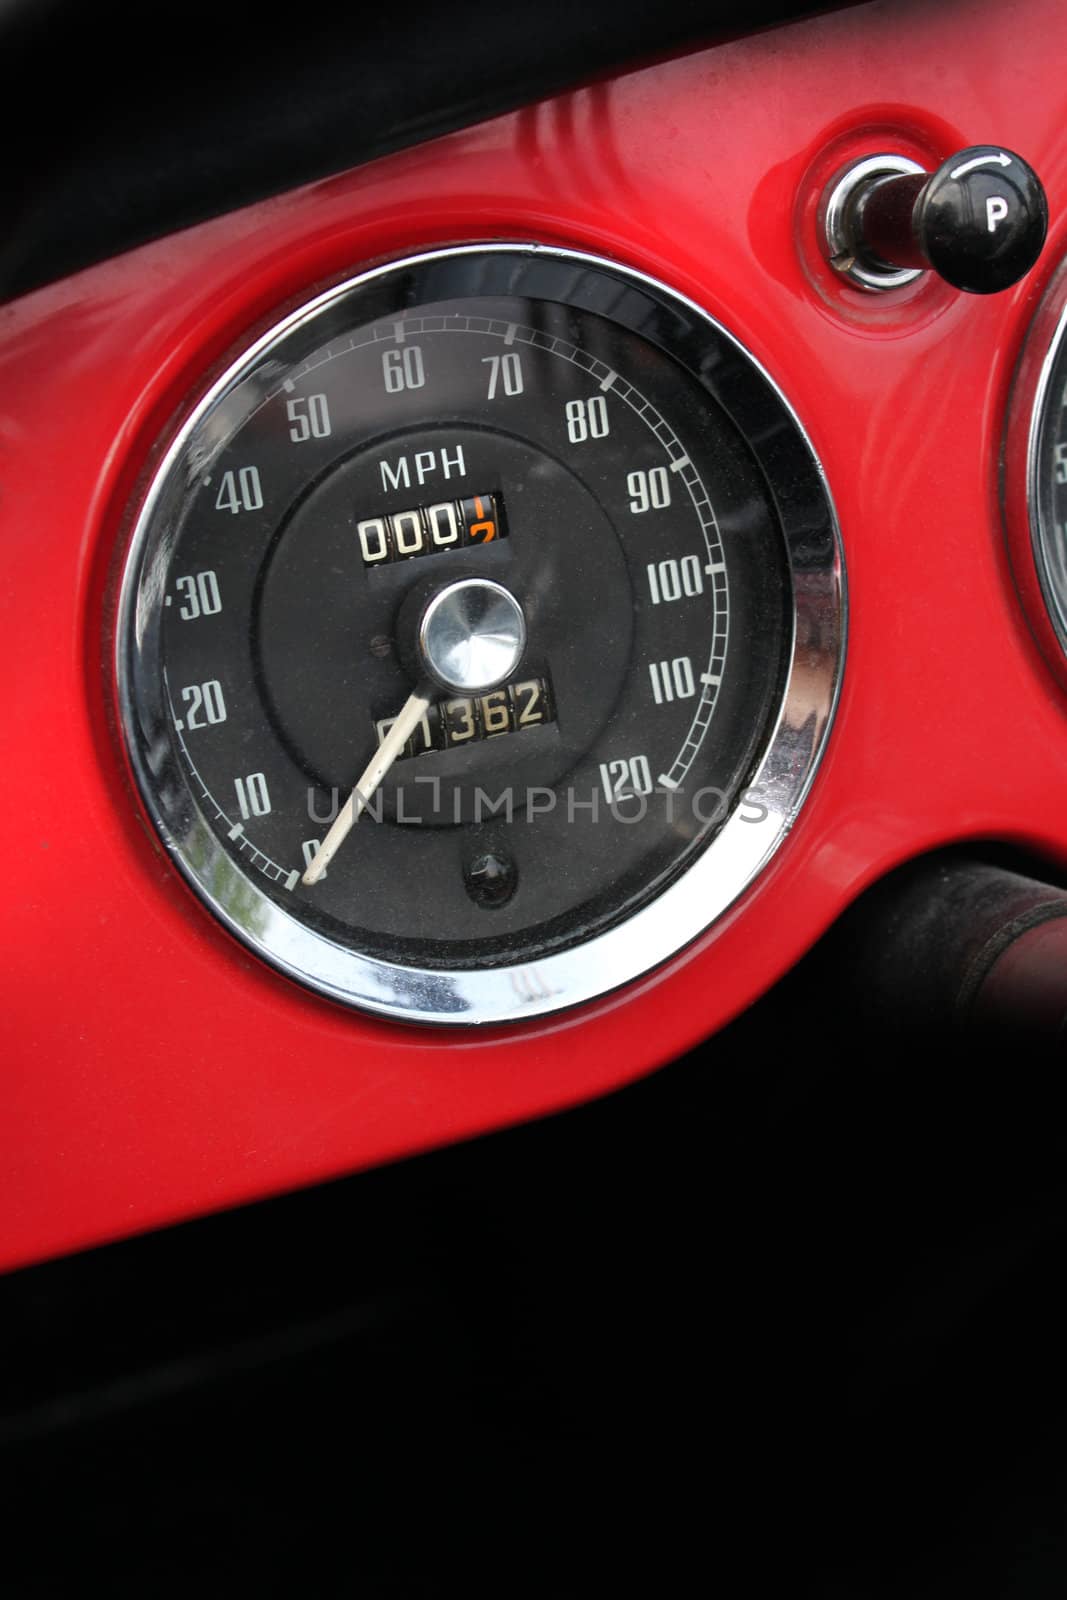 Chromed vintage speedometer in dash of classic red sports car